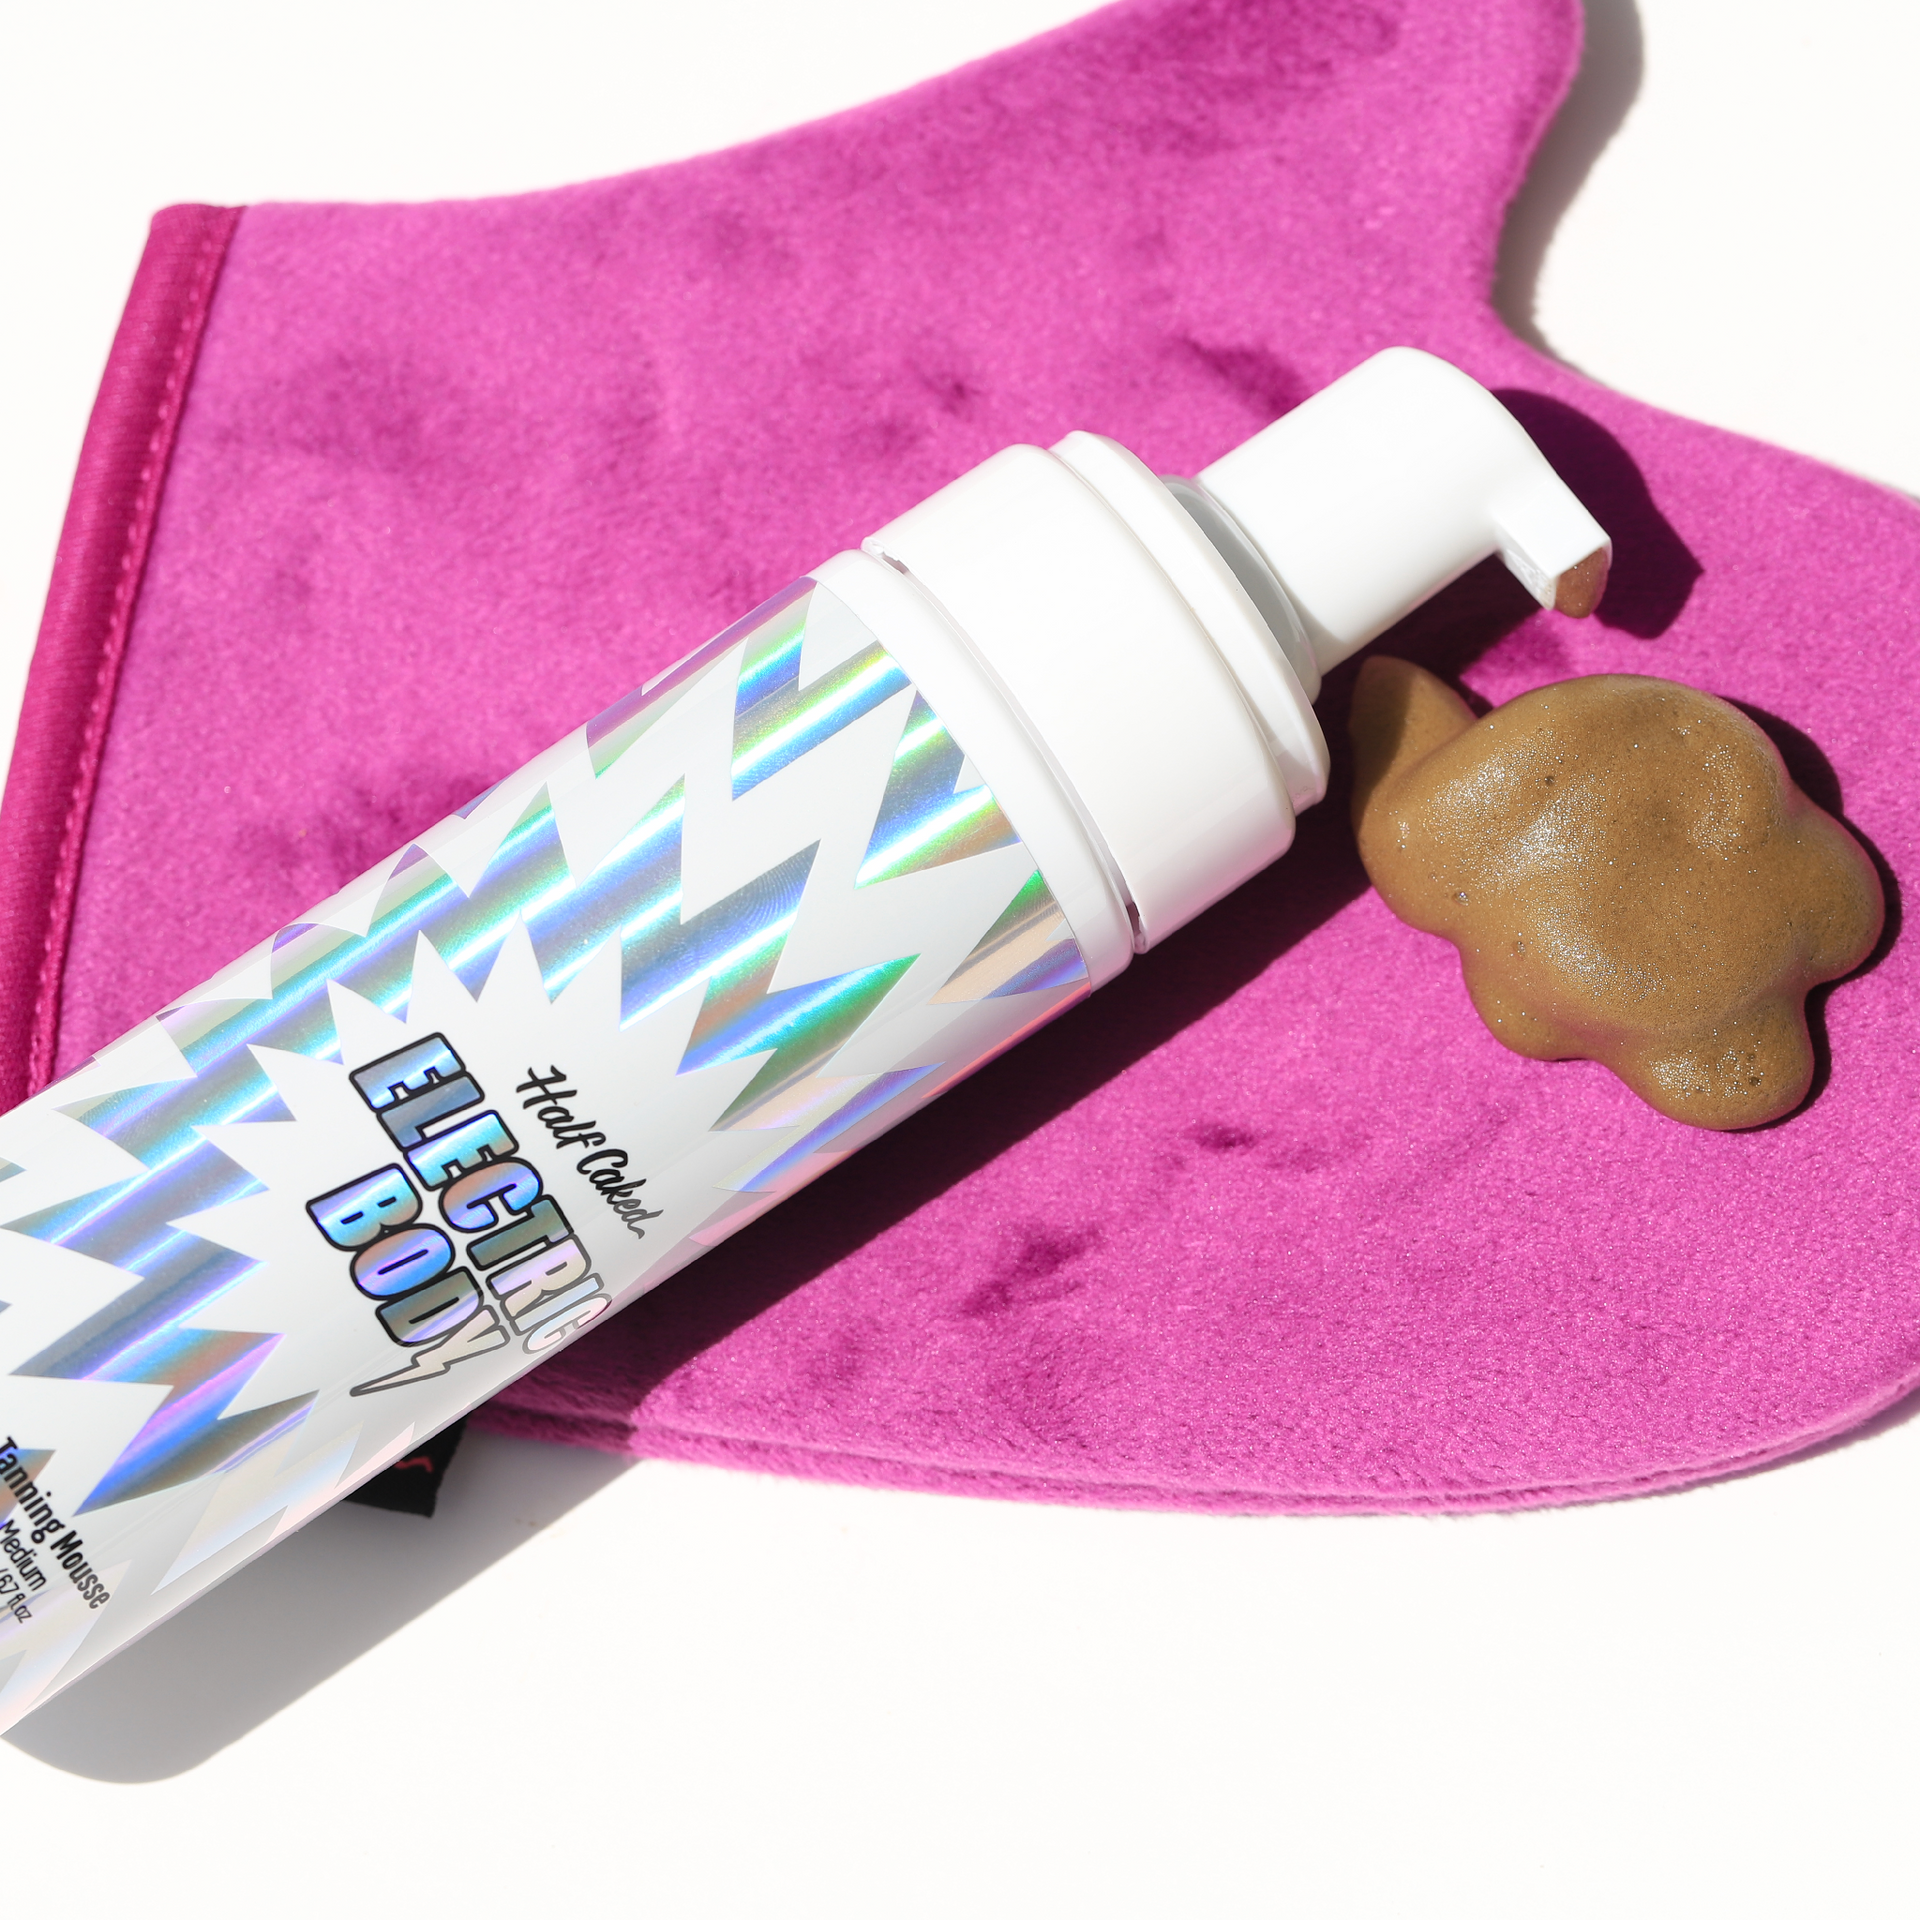 Electric Body Tanning Mousse with purple tanning mitt - Half Caked